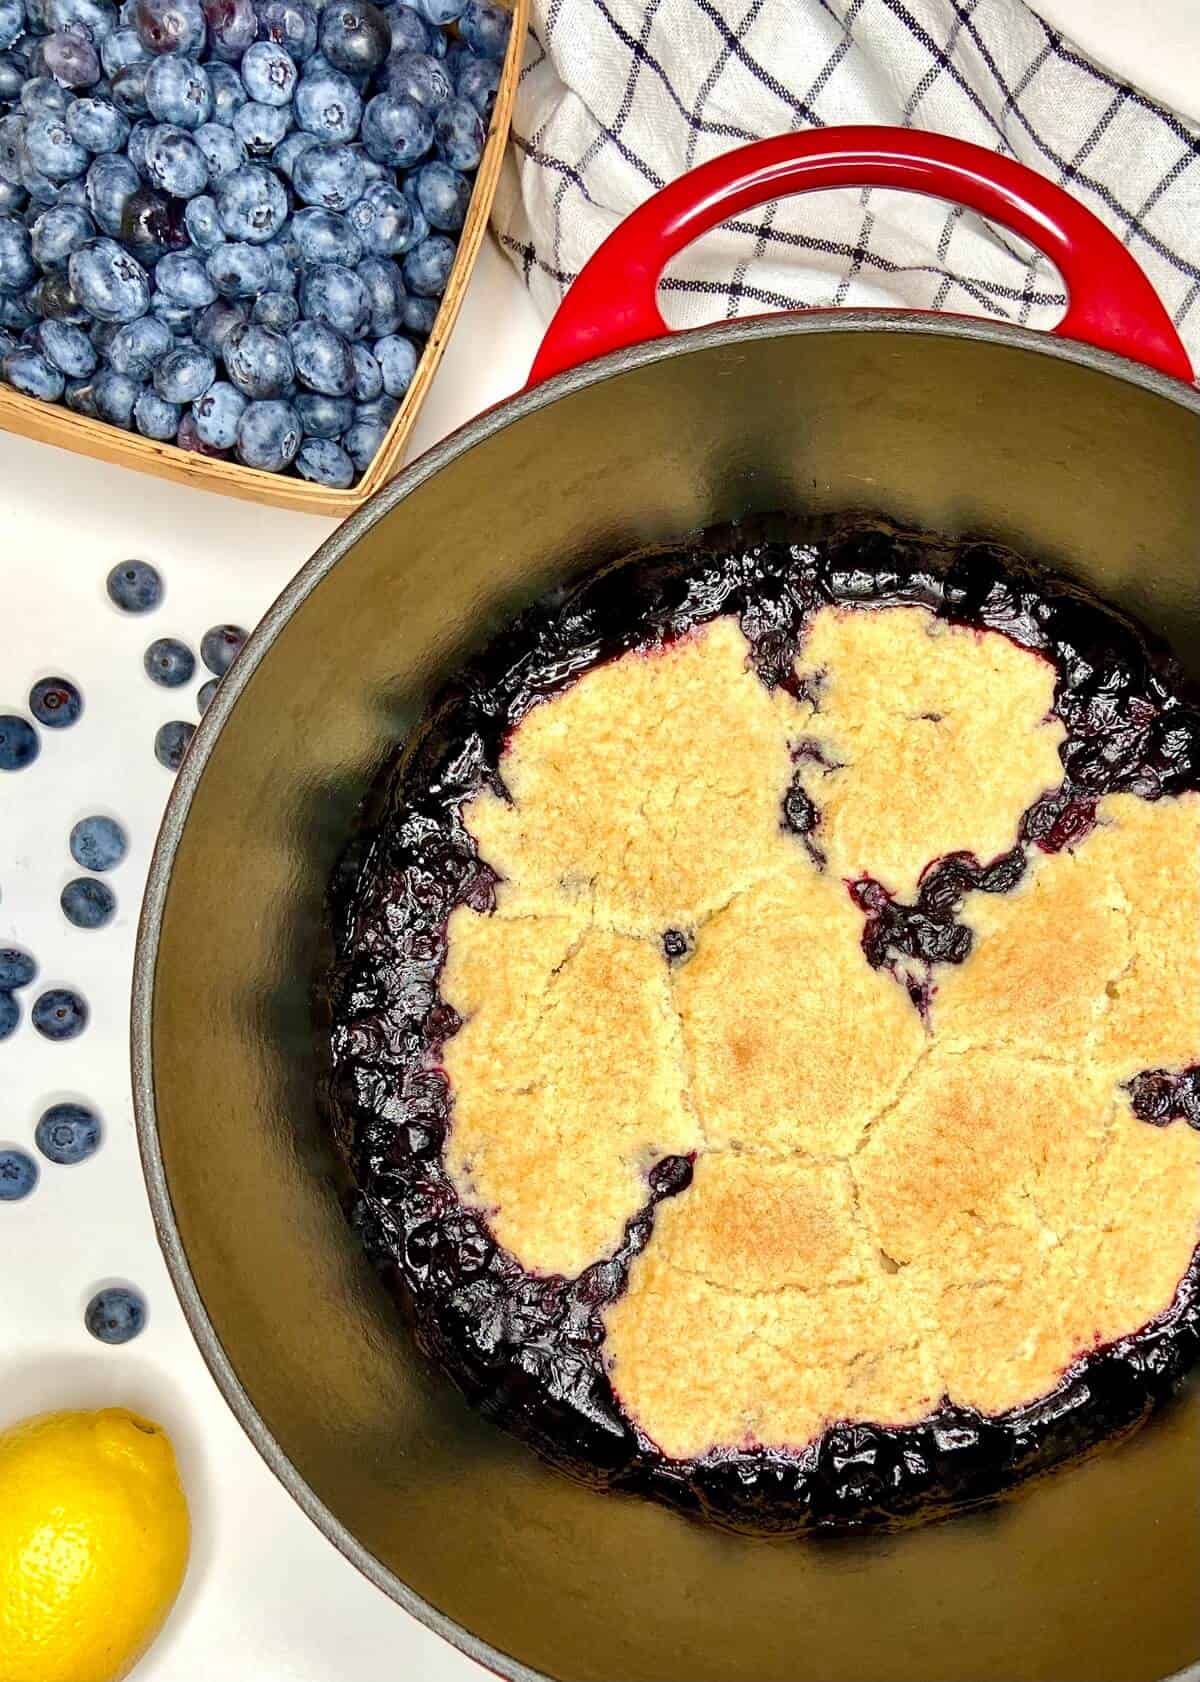 Cobbler in dutch oven, with a pint of blueberries and a towel on a white table.